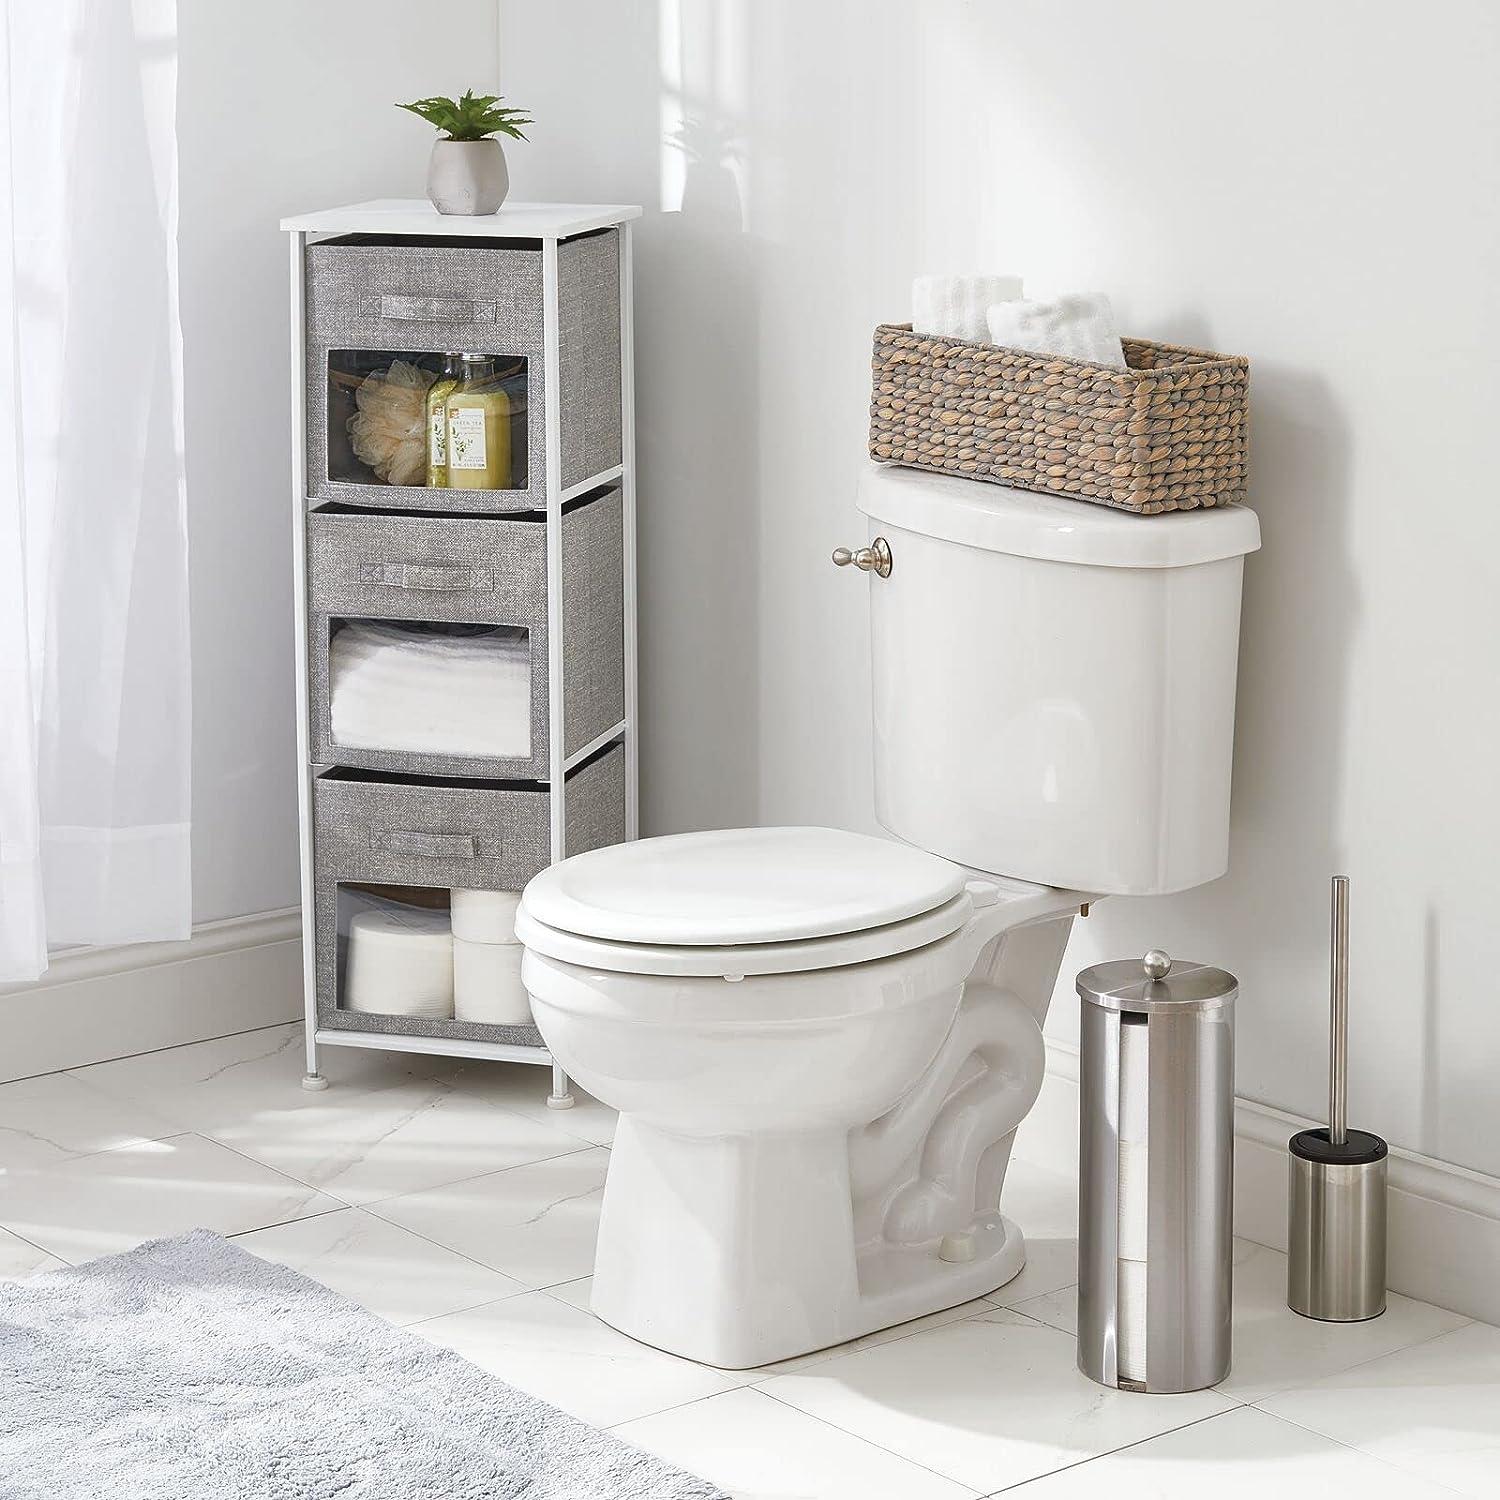 Freestanding Slim Storage Cabinet Bathroom Narrow with Toilet Paper Holder  & Trash Can